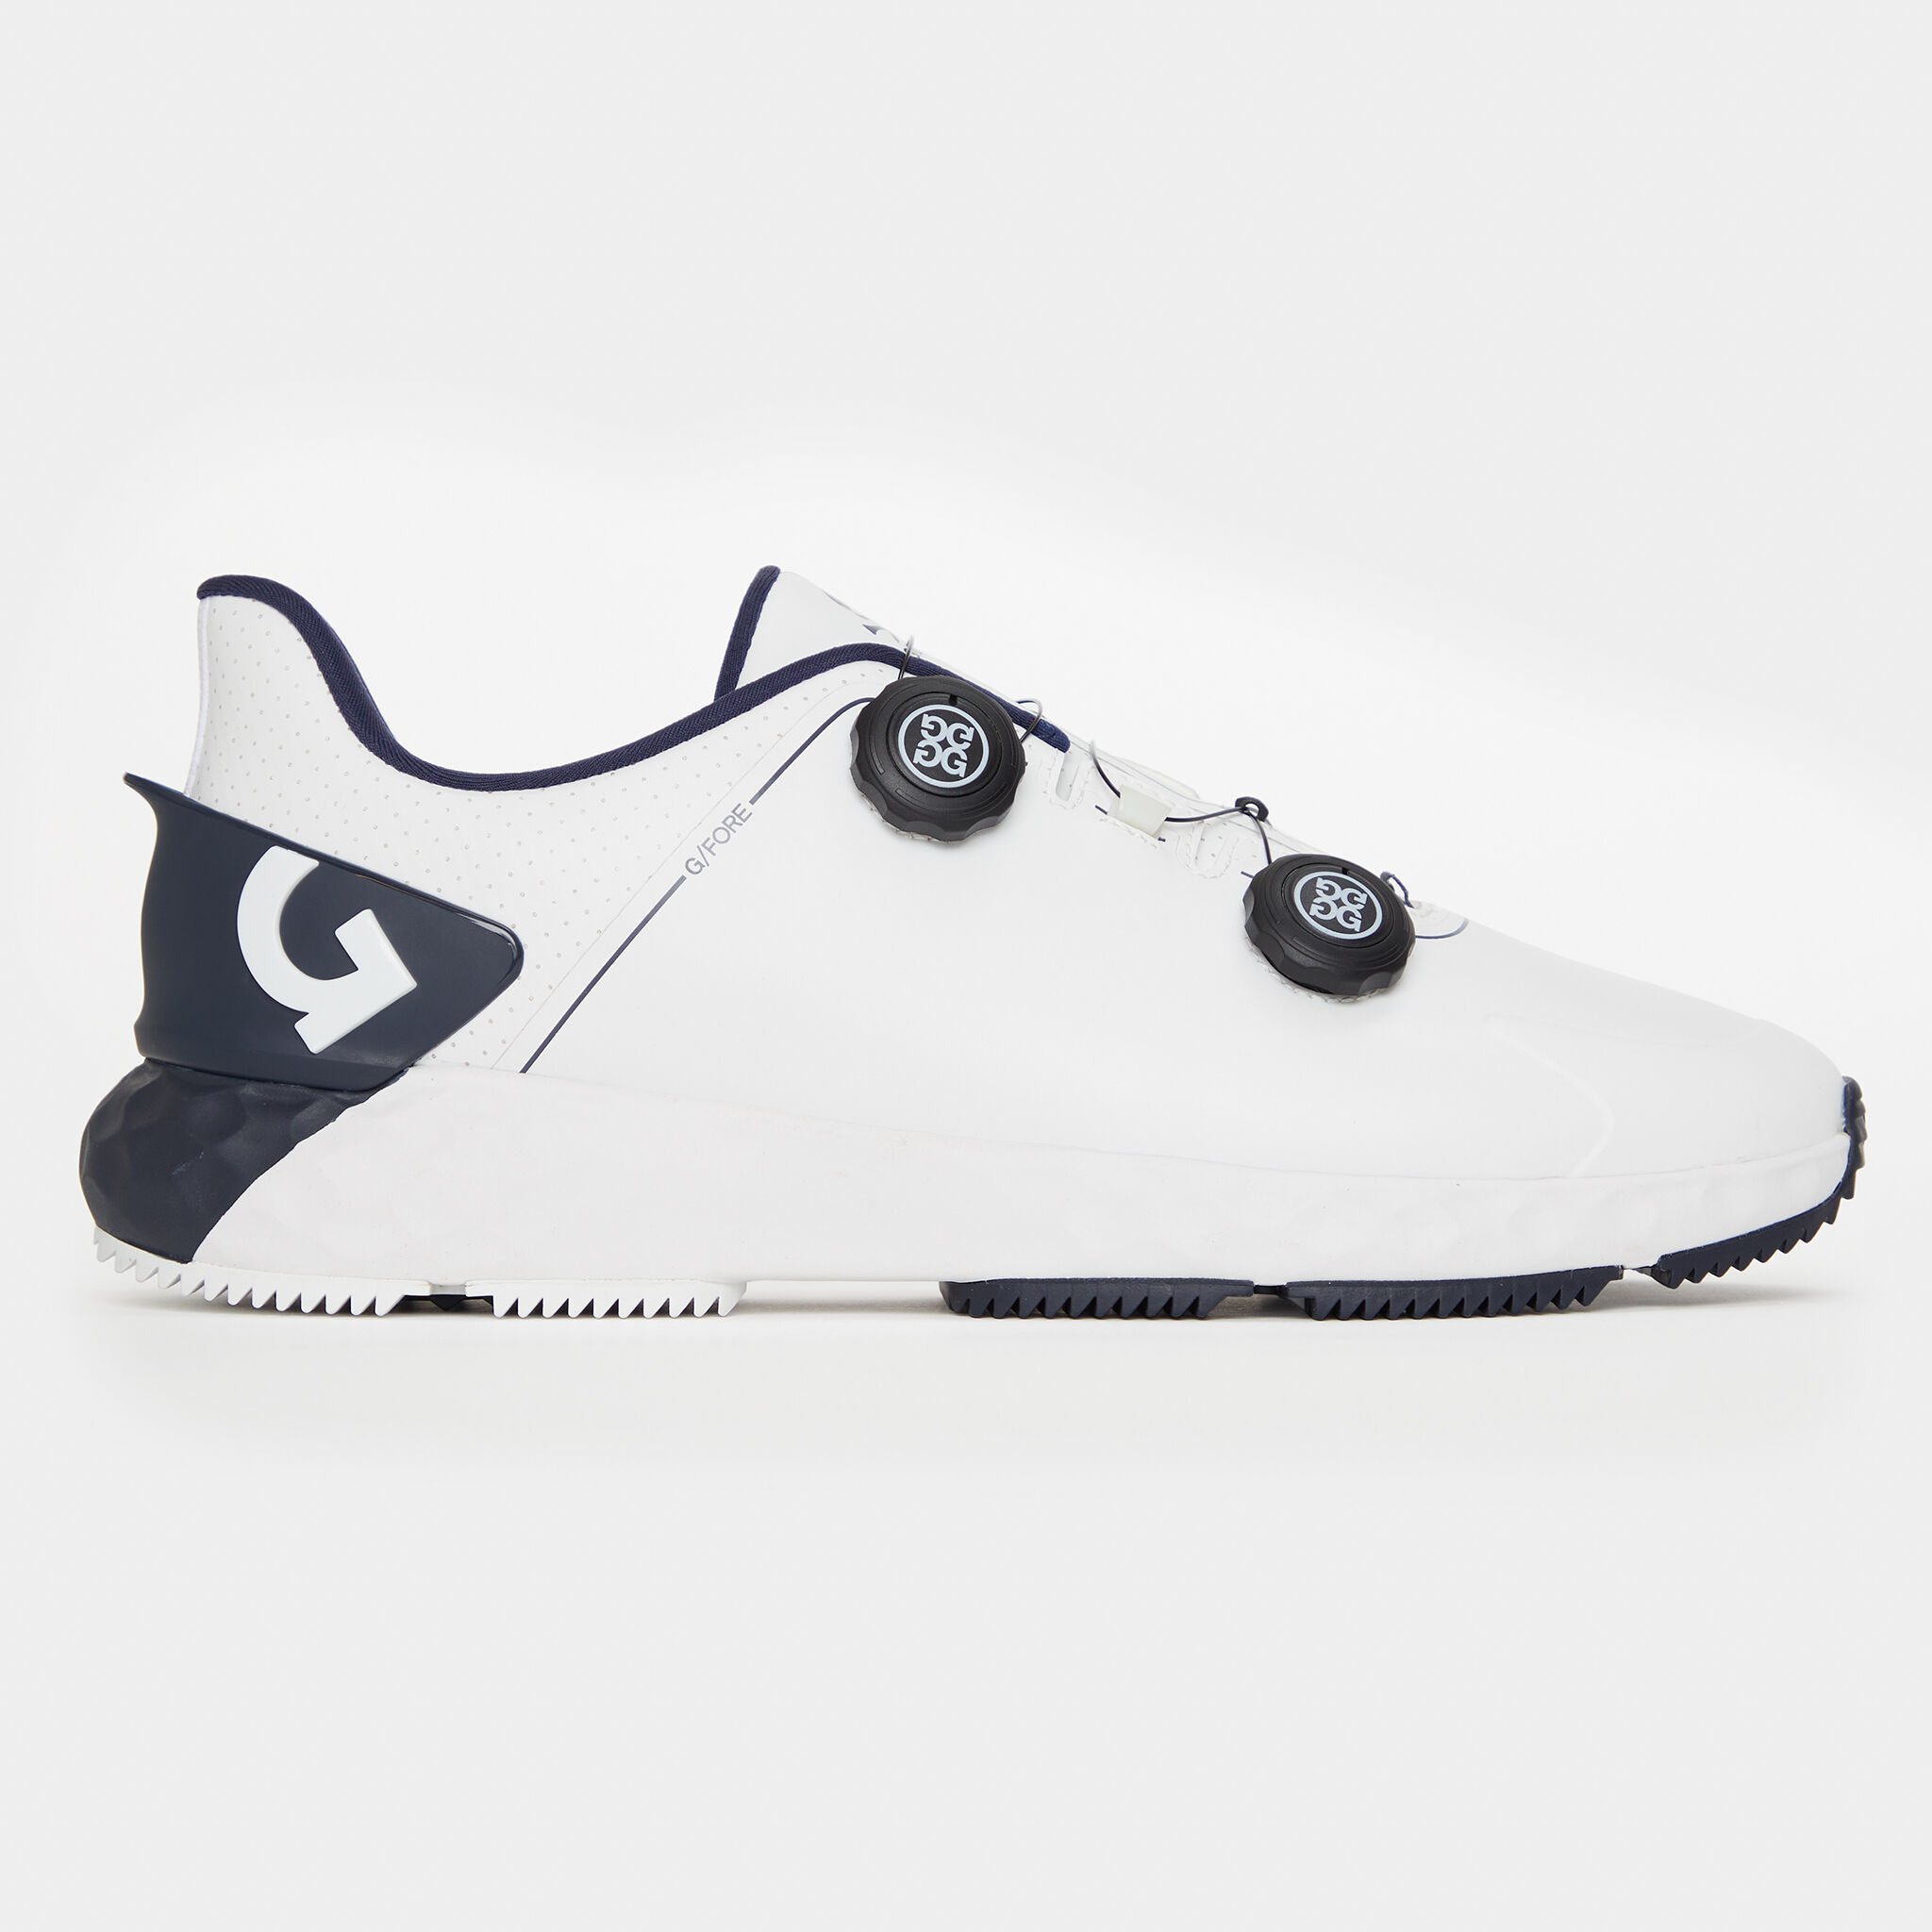 PERFORATED G/DRIVE GOLF SHOE – G/FORE